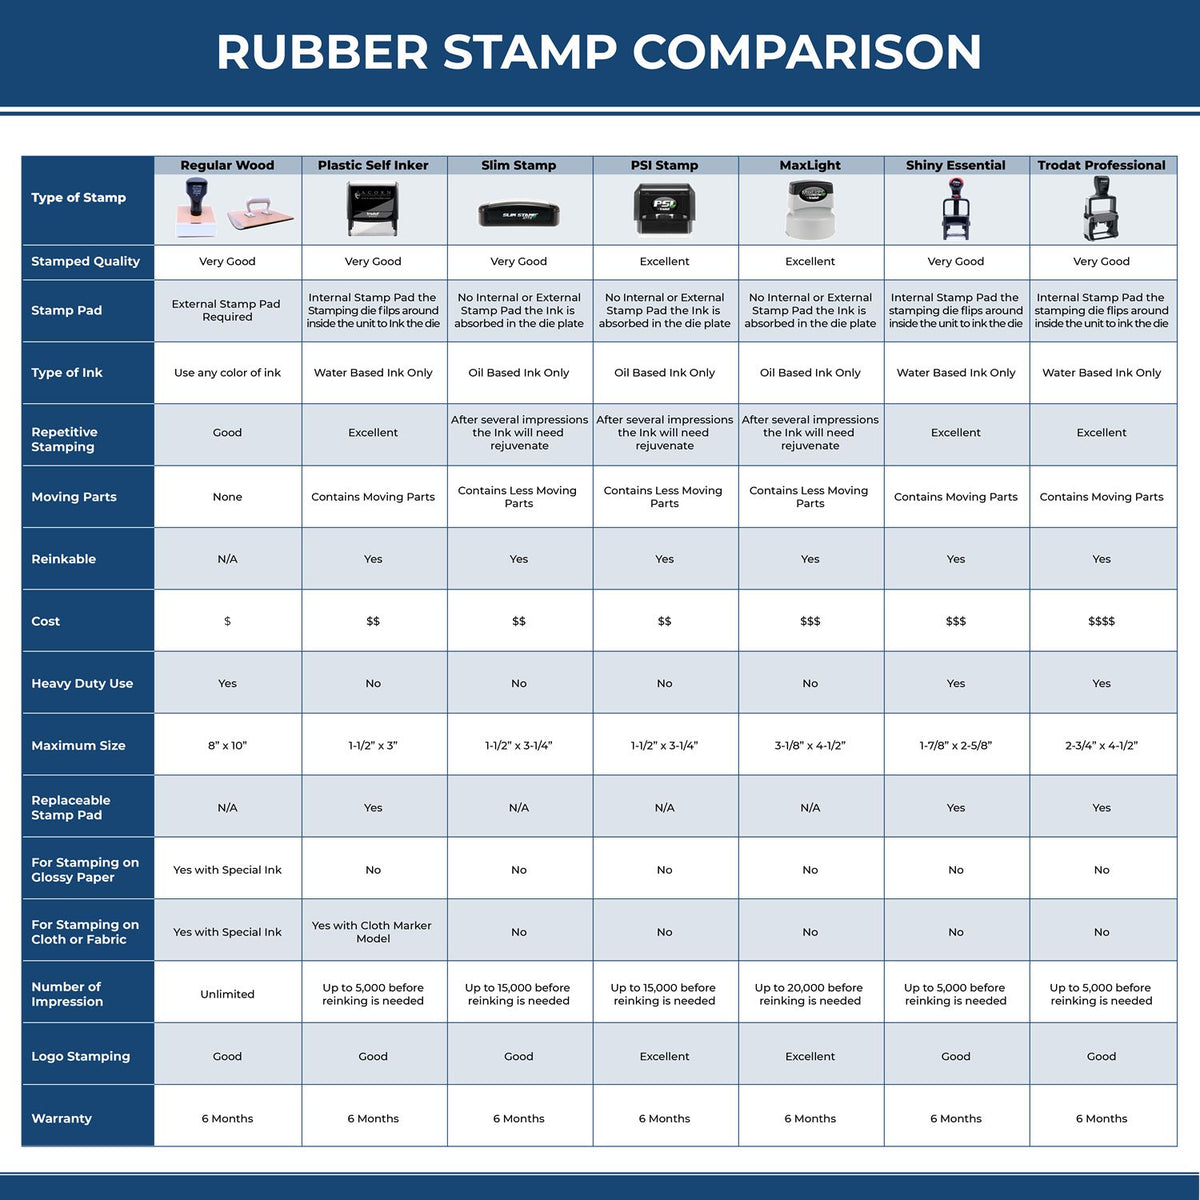 Large Pre-Inked Asymptomatic Stamp 4997SLIM Rubber Stamp Comparison